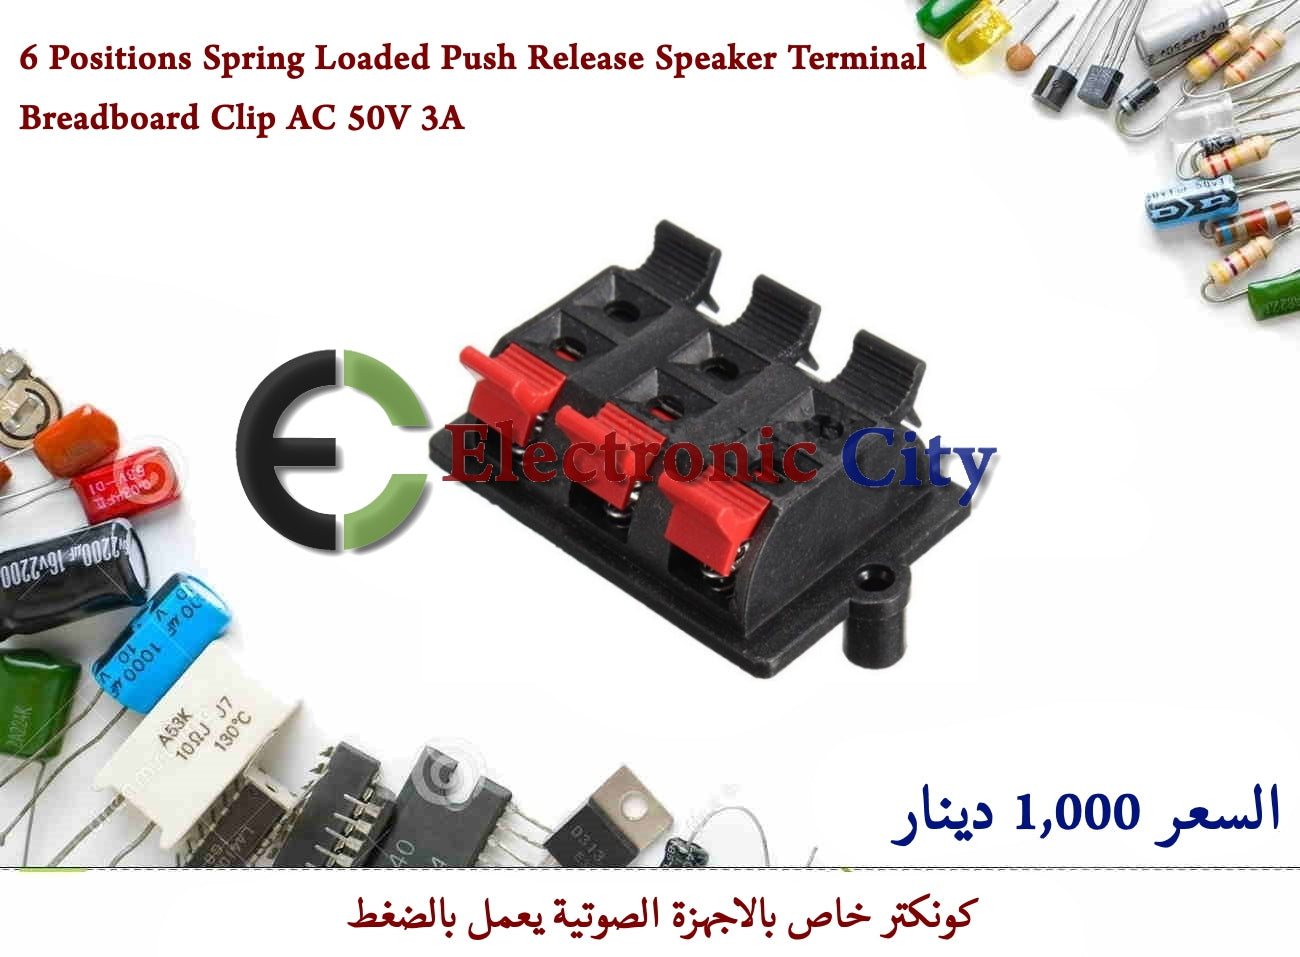 6 Positions Spring Loaded Push Release Speaker Terminal Breadboard Clip AC 50V 3A #D1 050853